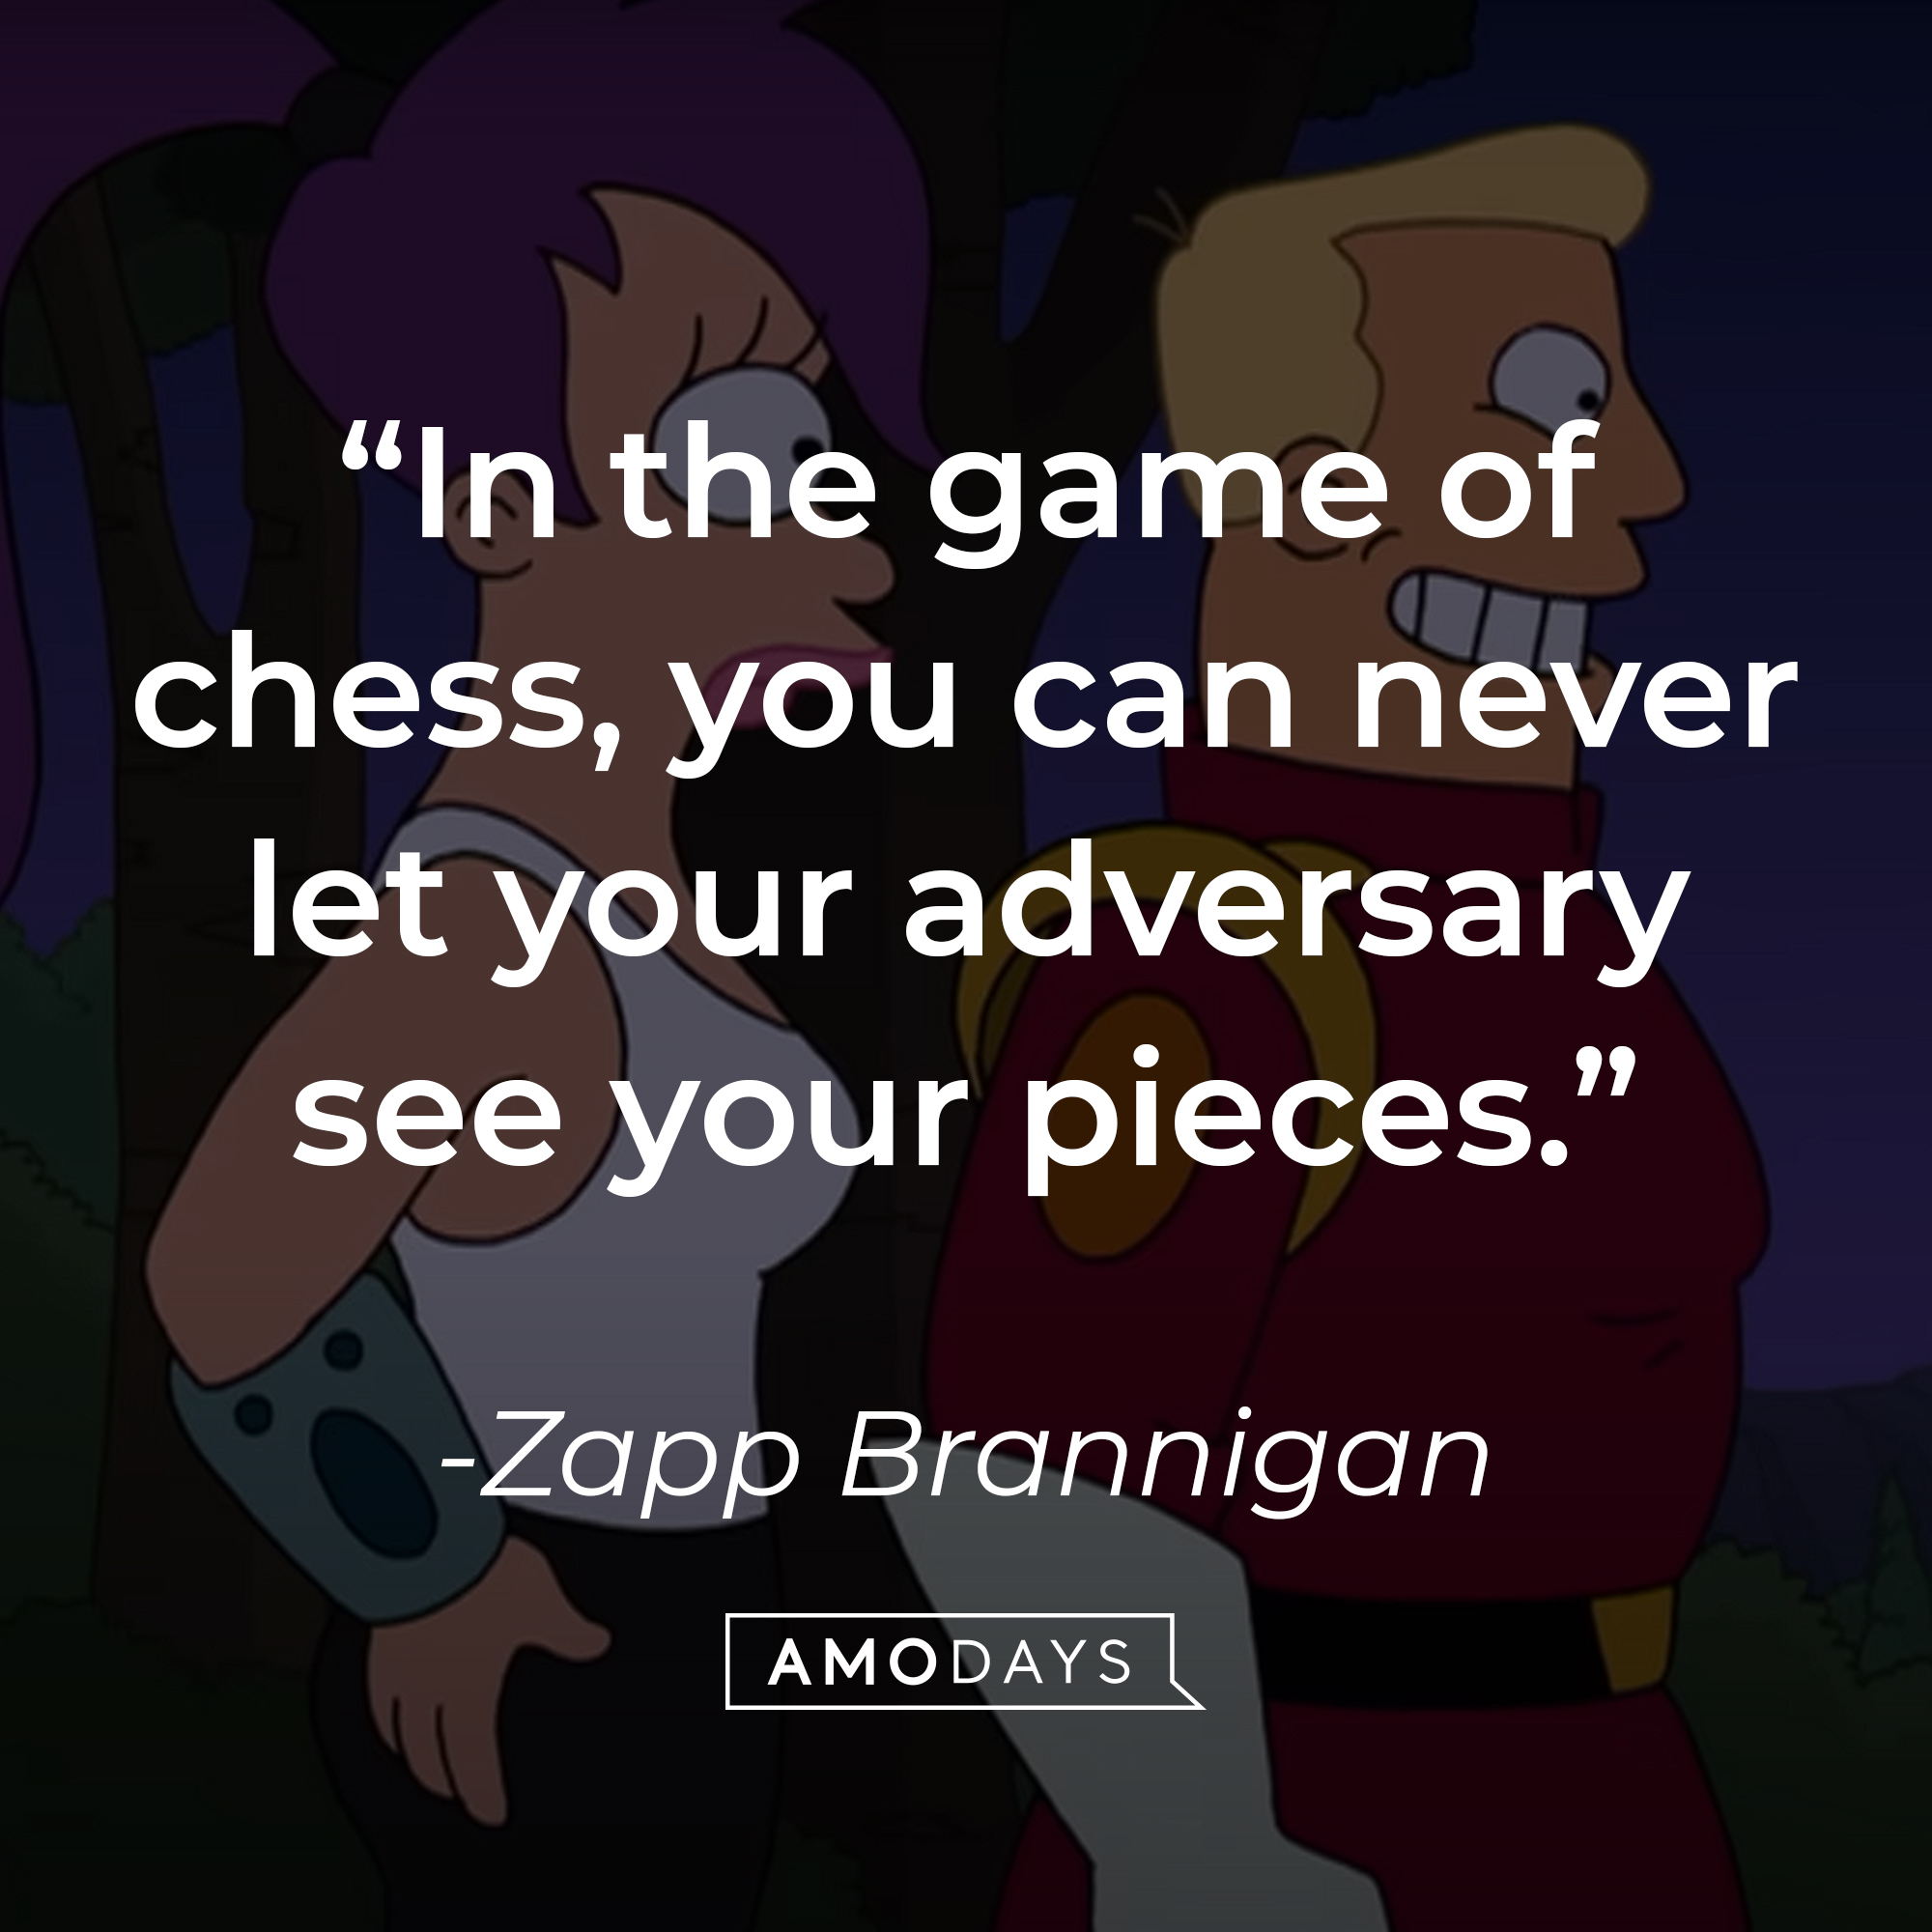 Zapp Brannigan's quote: "In the game of chess, you can never let your adversary see your pieces." | Source: YouTube/adultswim